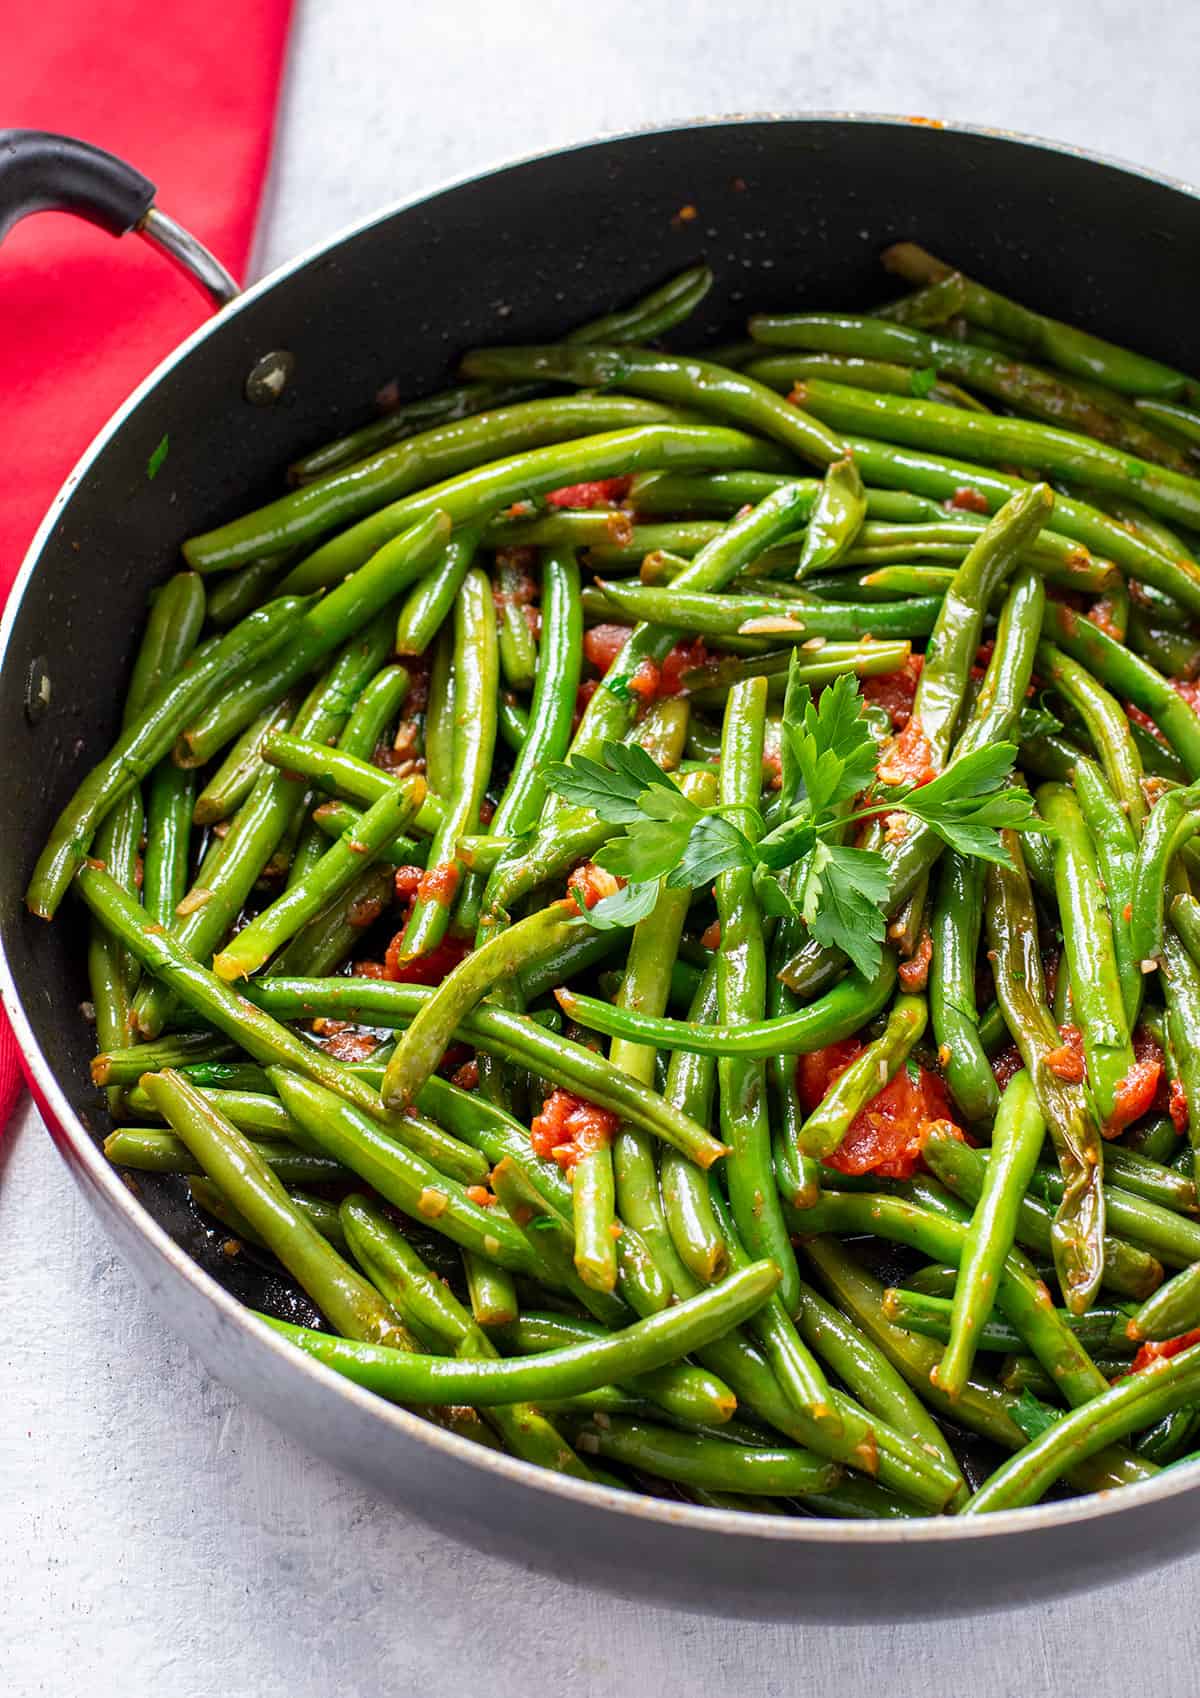 skillet of green beans with tomatoes